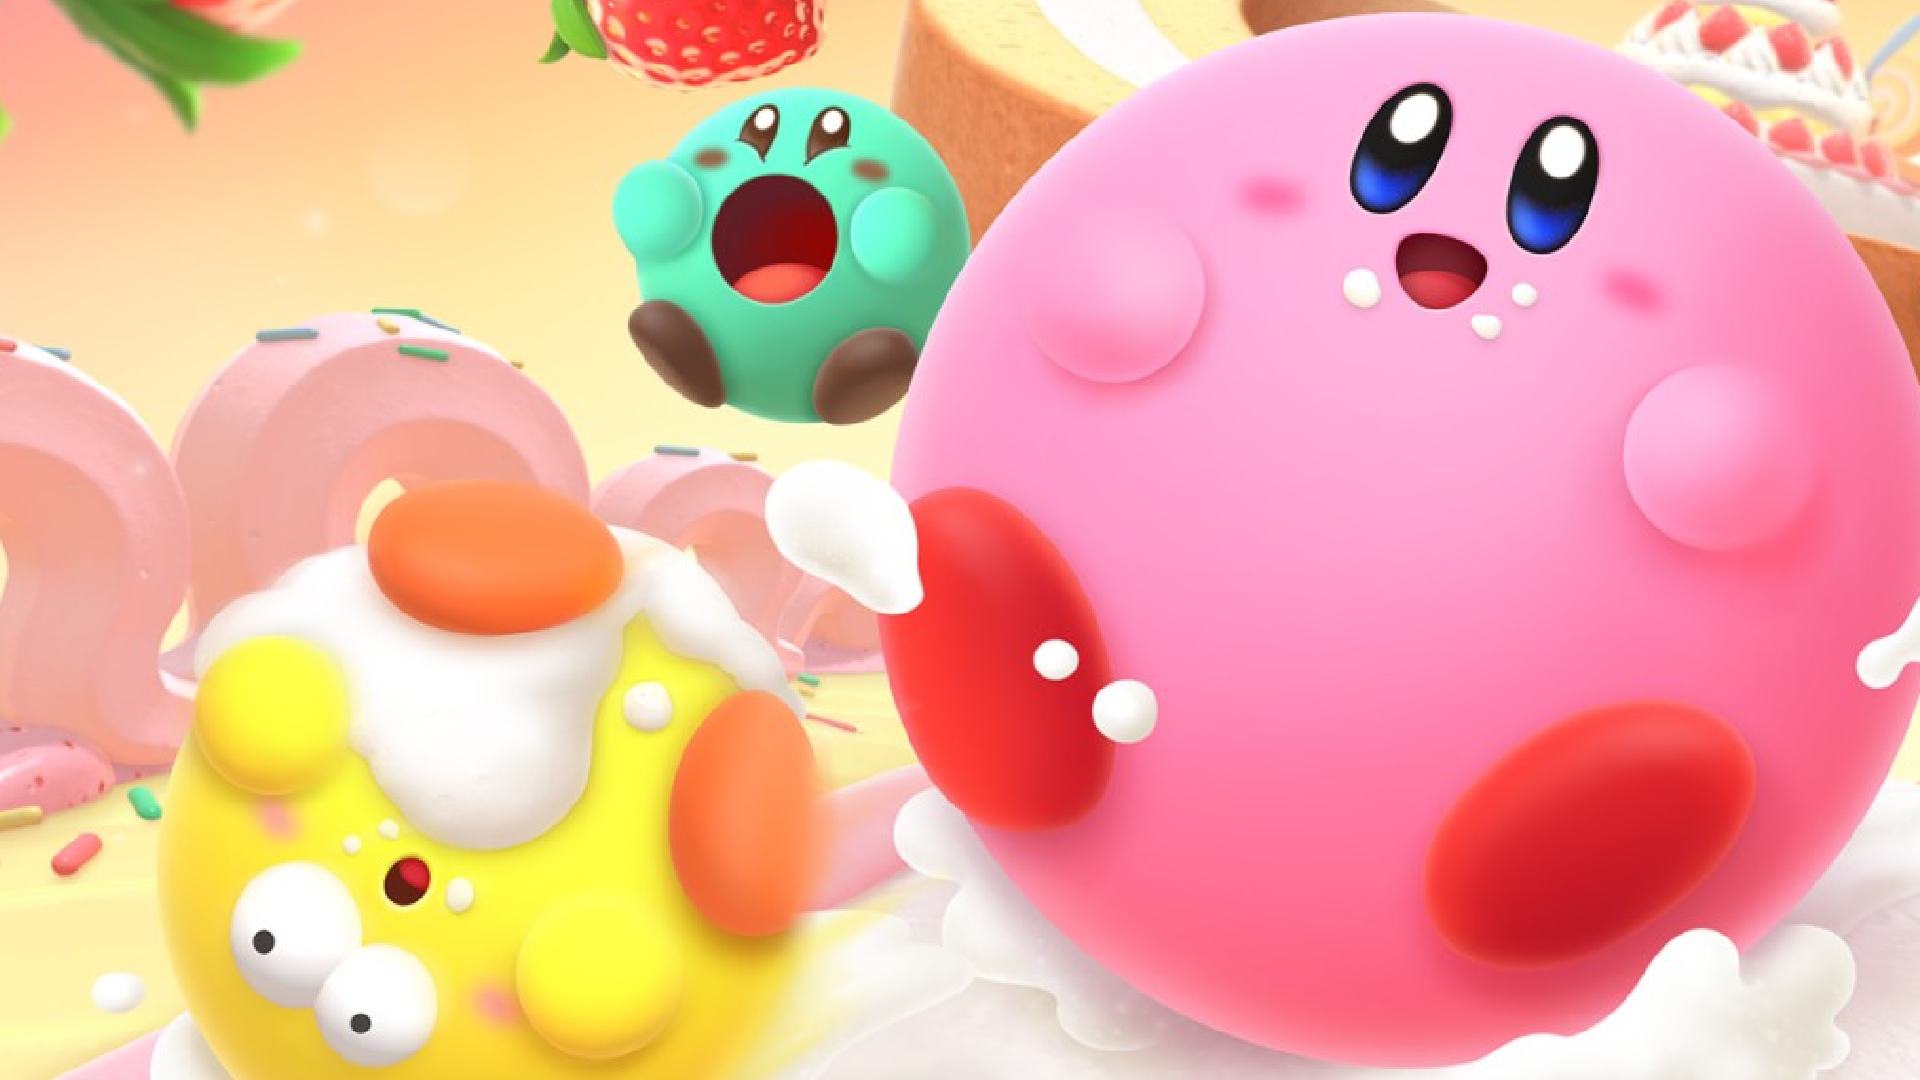 Kirby's Dream Buffet: Kirby can be seen alongside two other pink puffballs